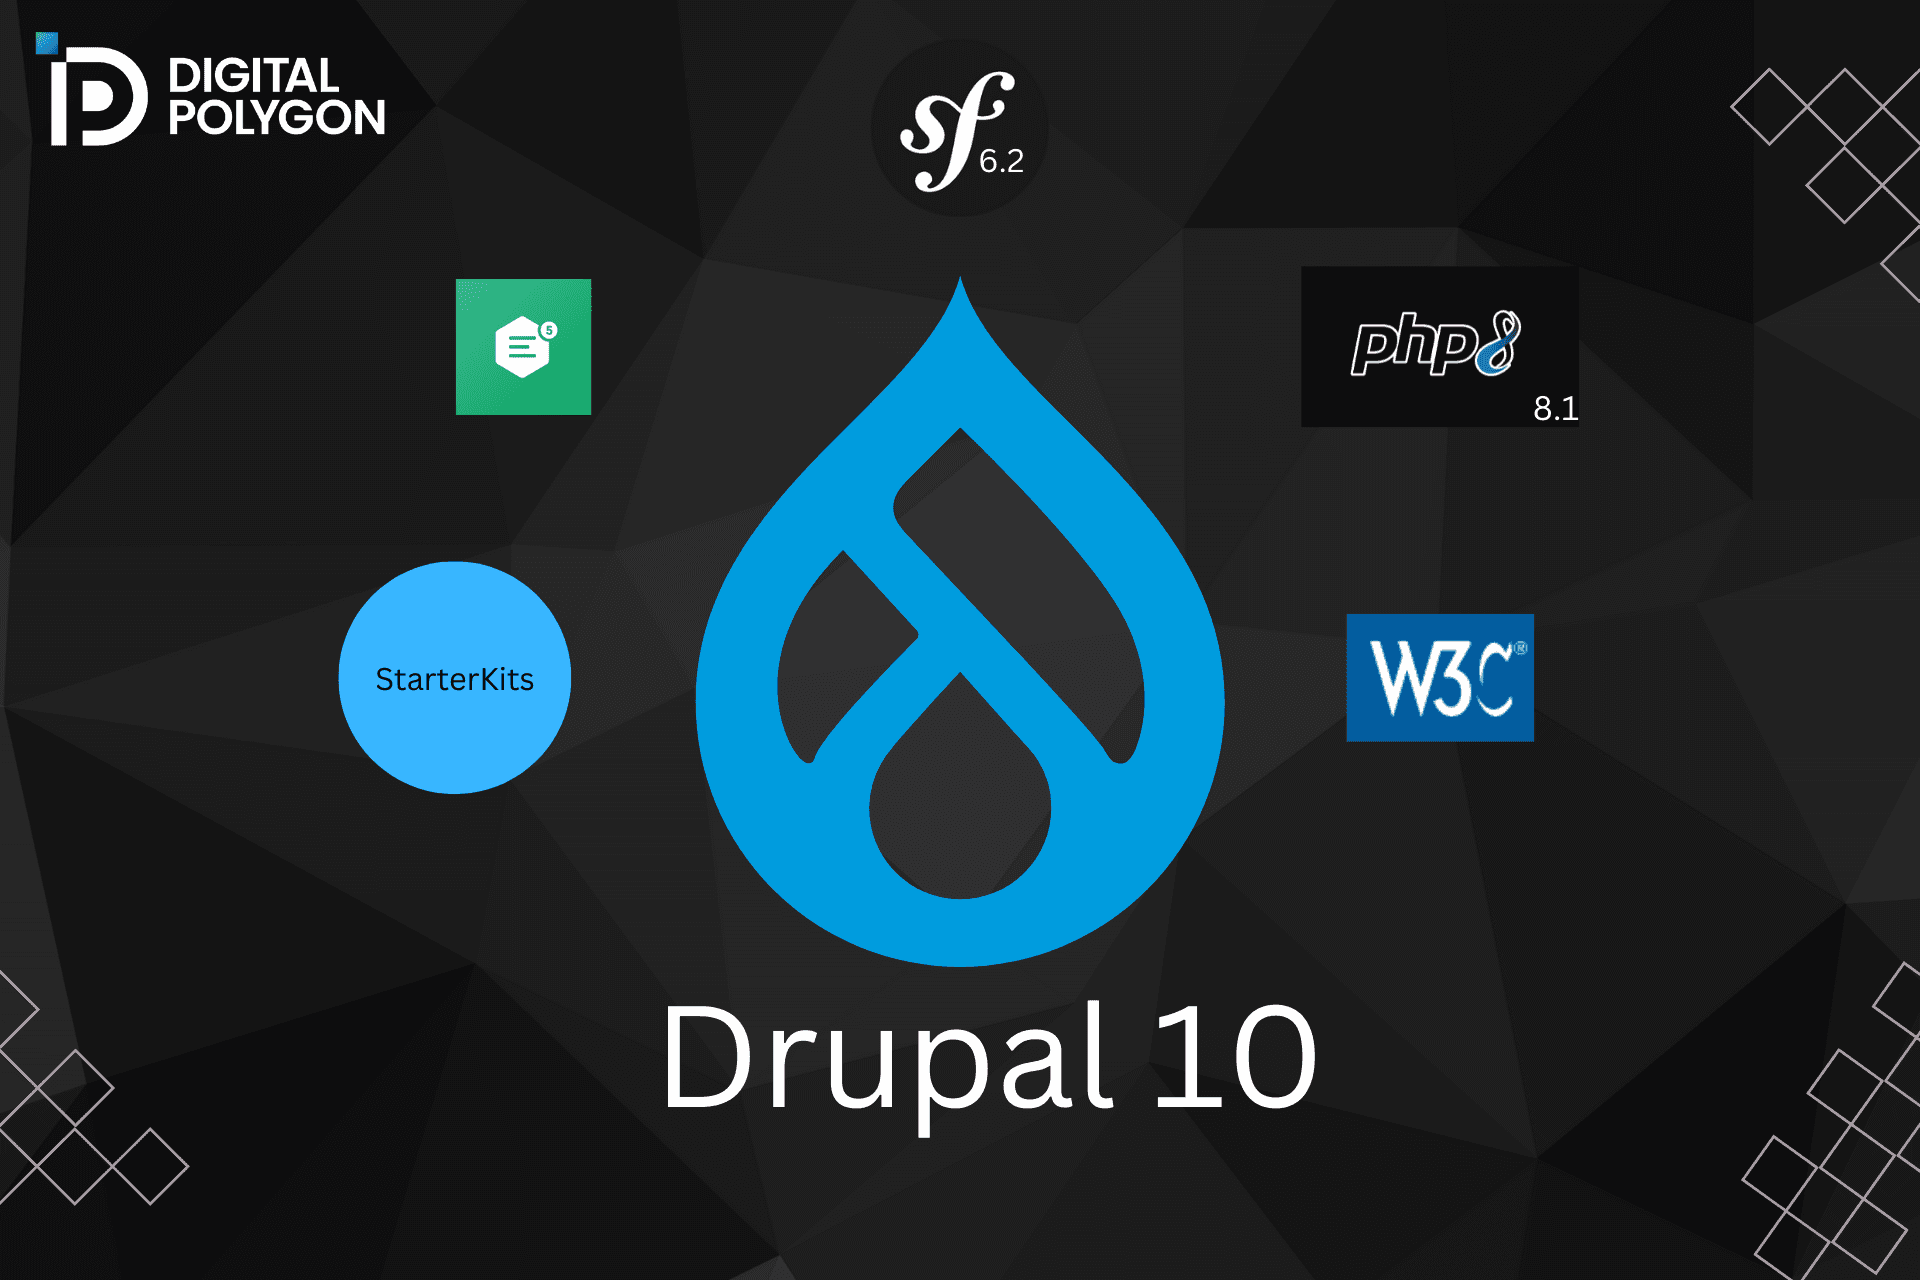 What's New in Drupal 10